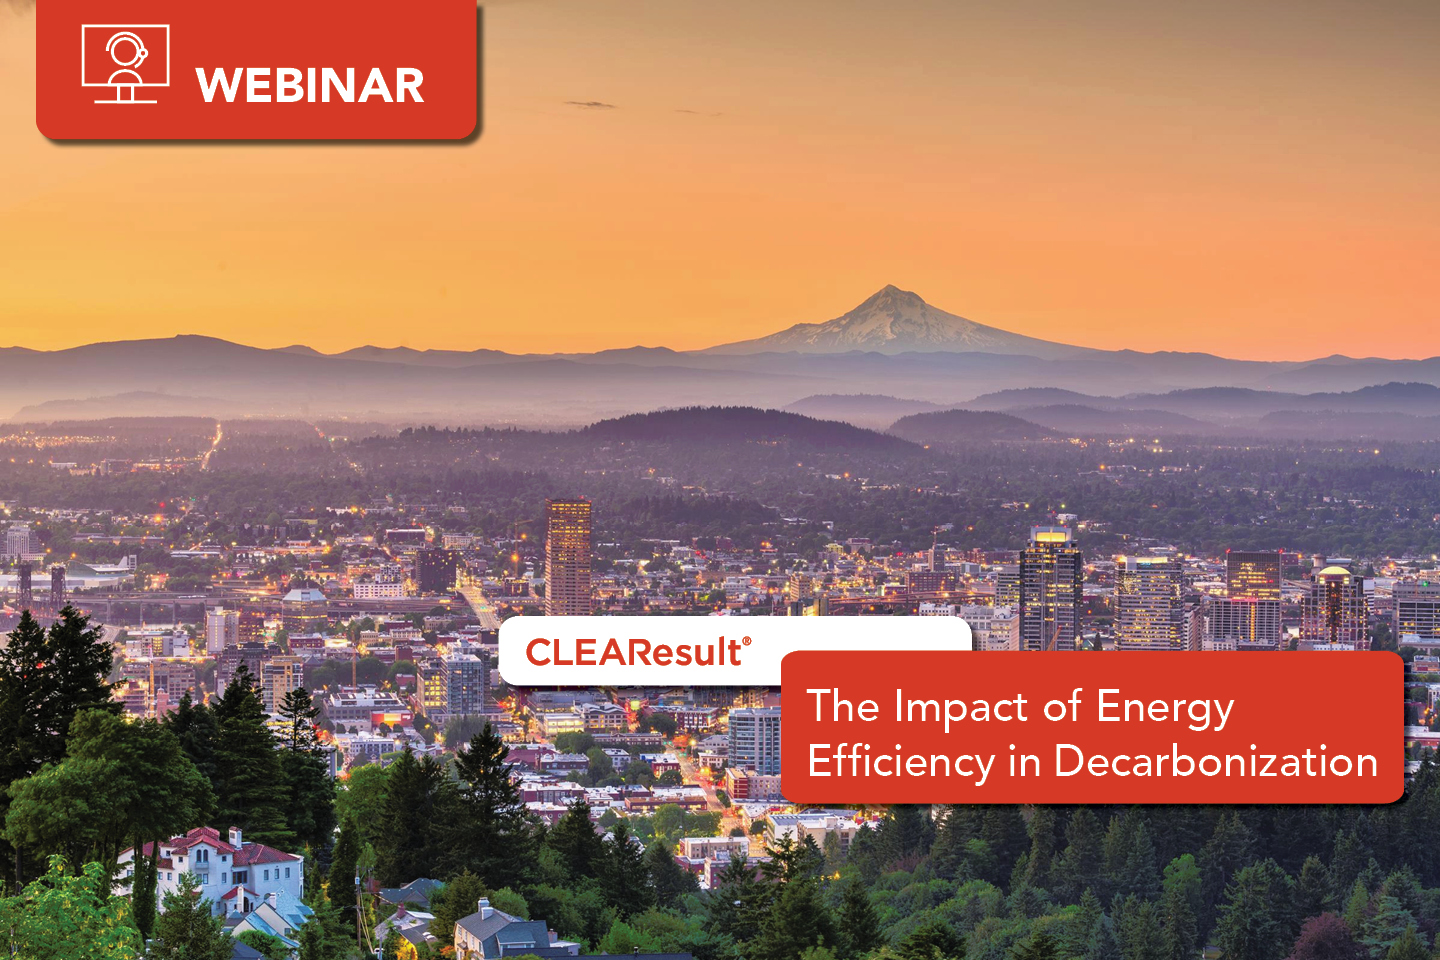 Our webinar on decarbonization through energy efficiency is now available for playback